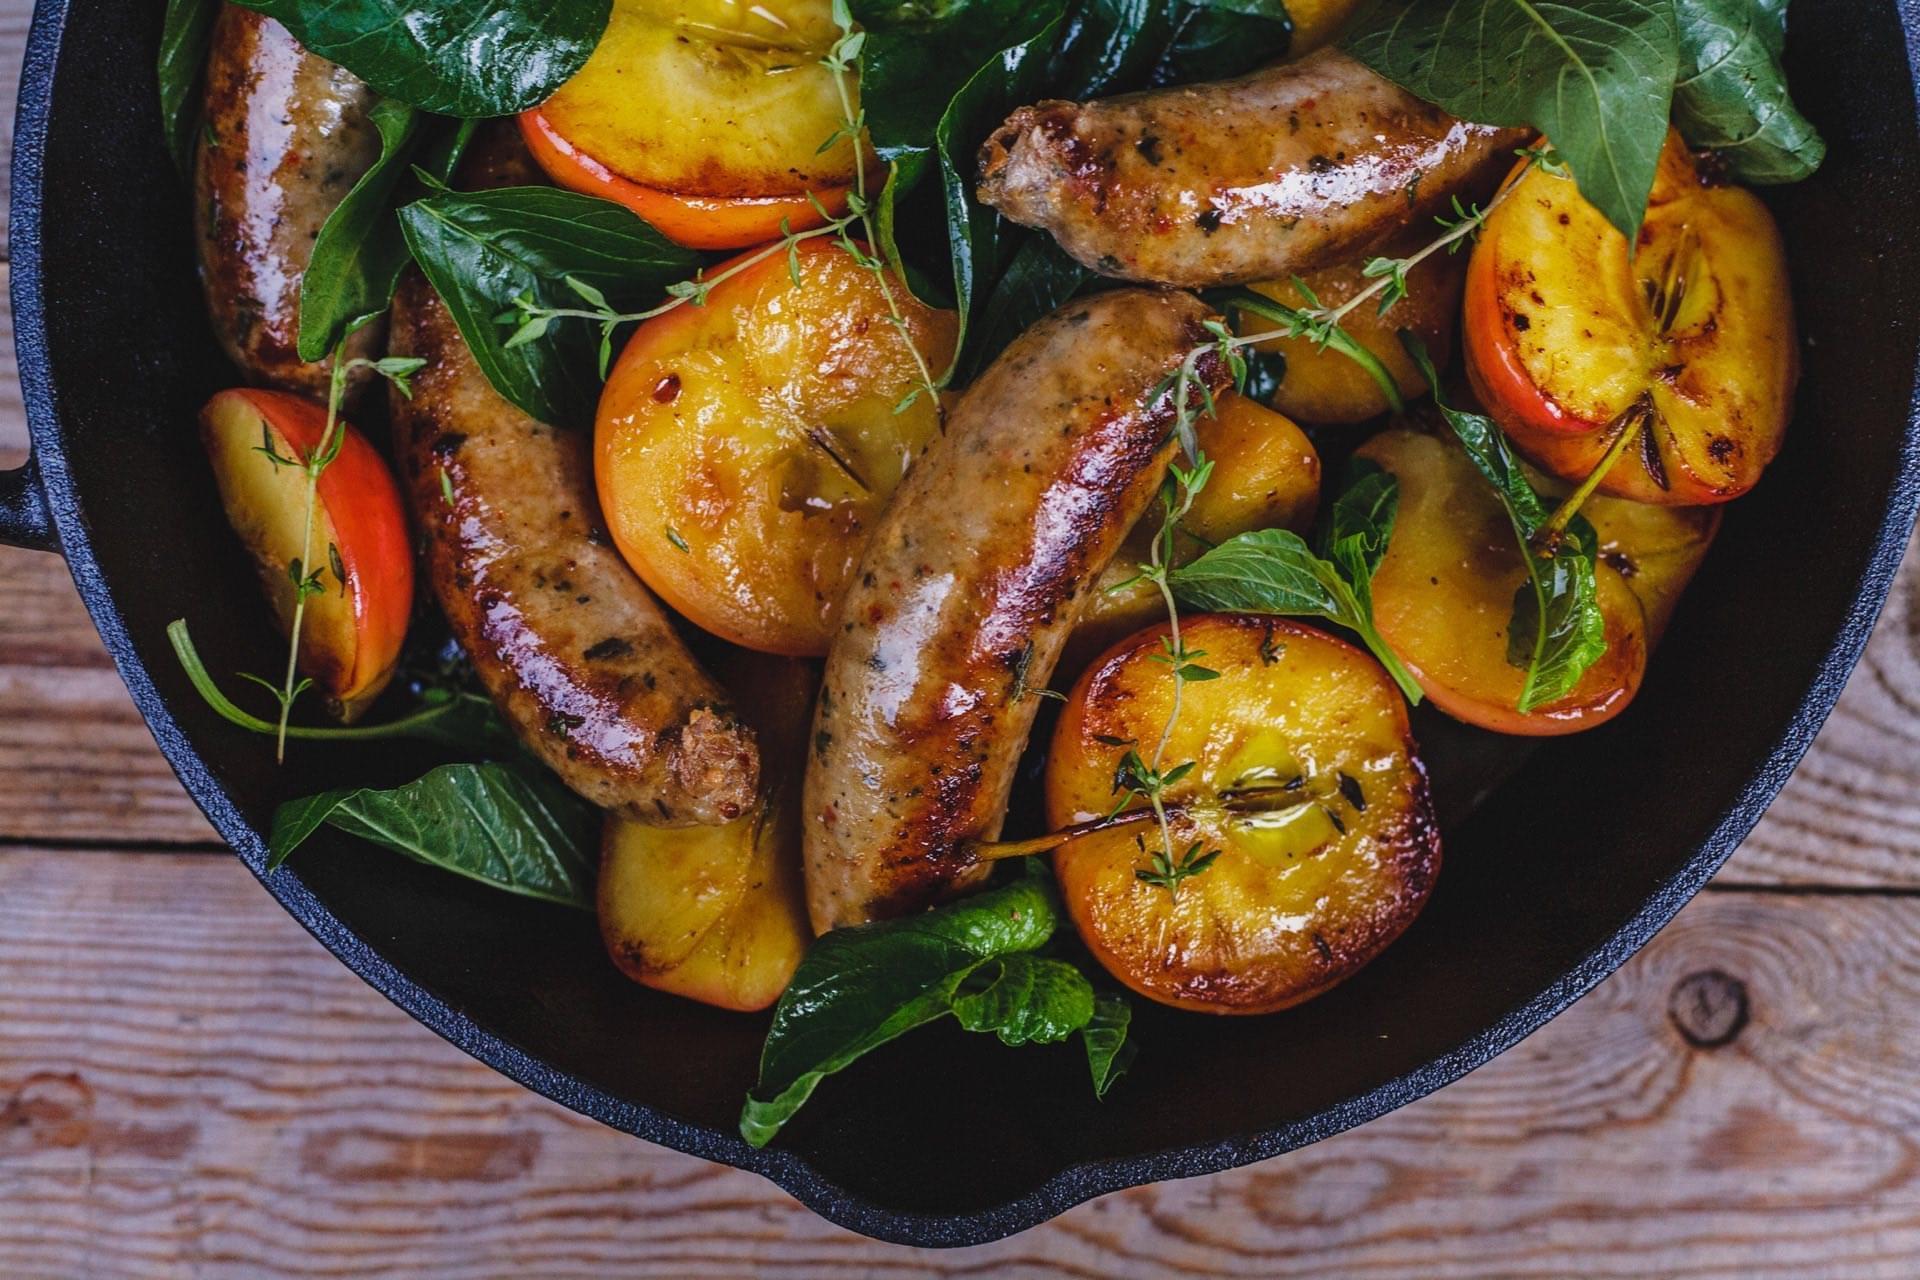 Pan Seared Sausages And Apples With Honey, Thyme And Greens